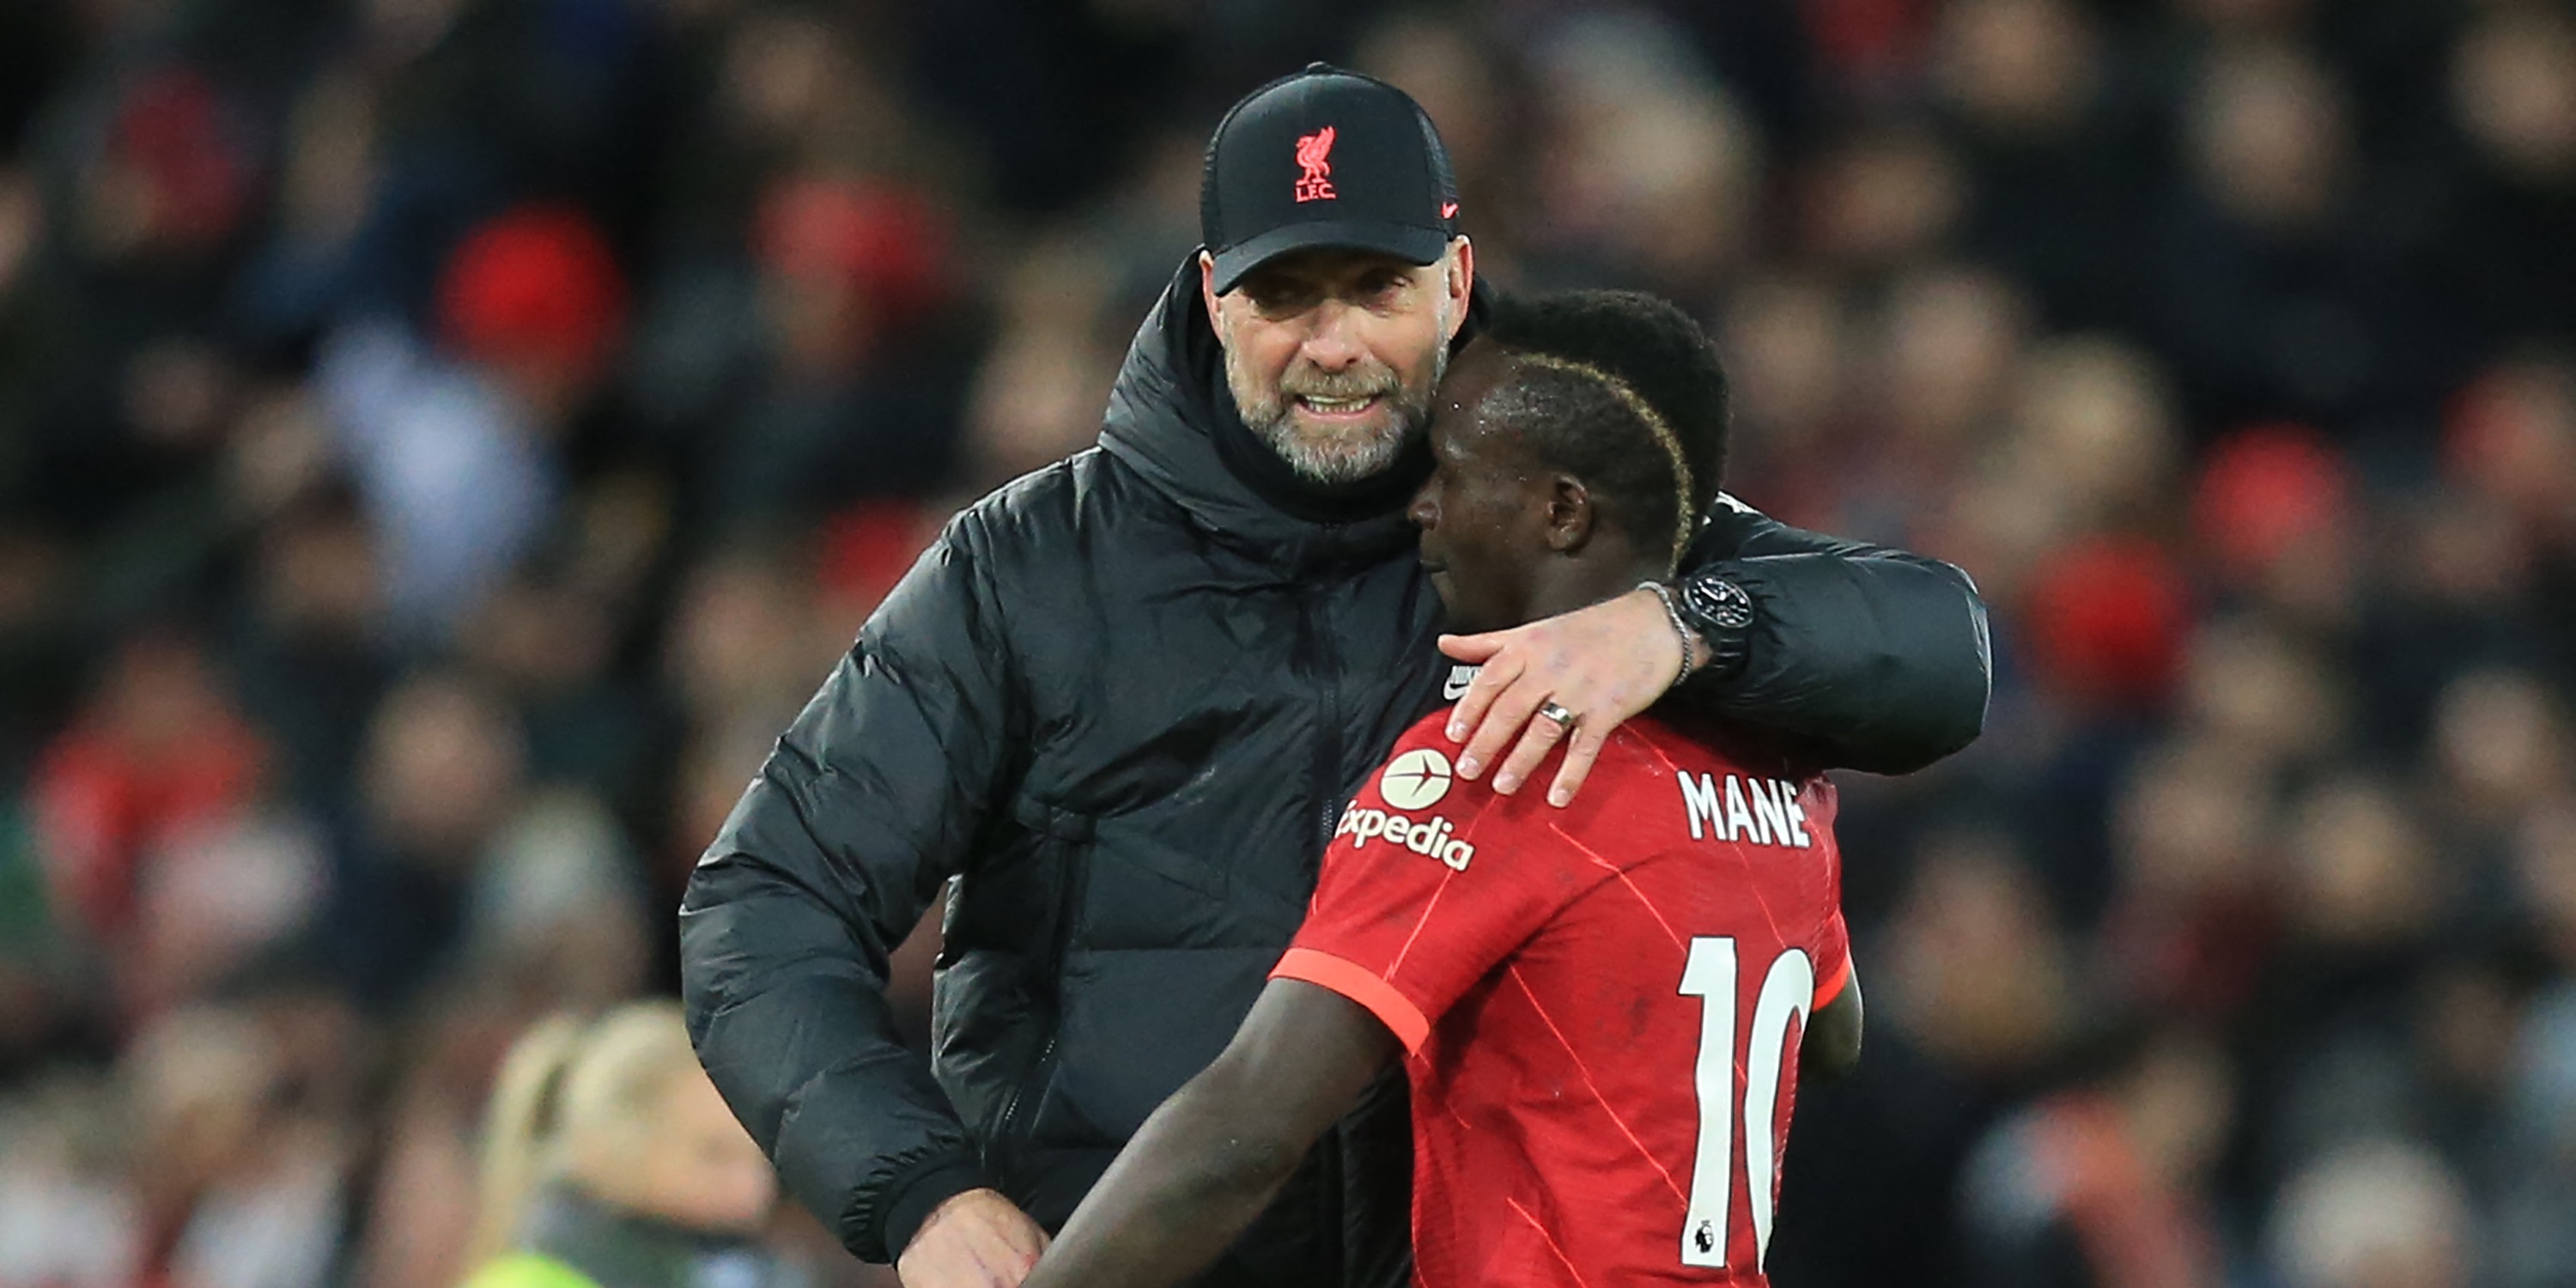 Mane says he’ll hold onto his Liverpool connection by doing one thing after every Bayern game